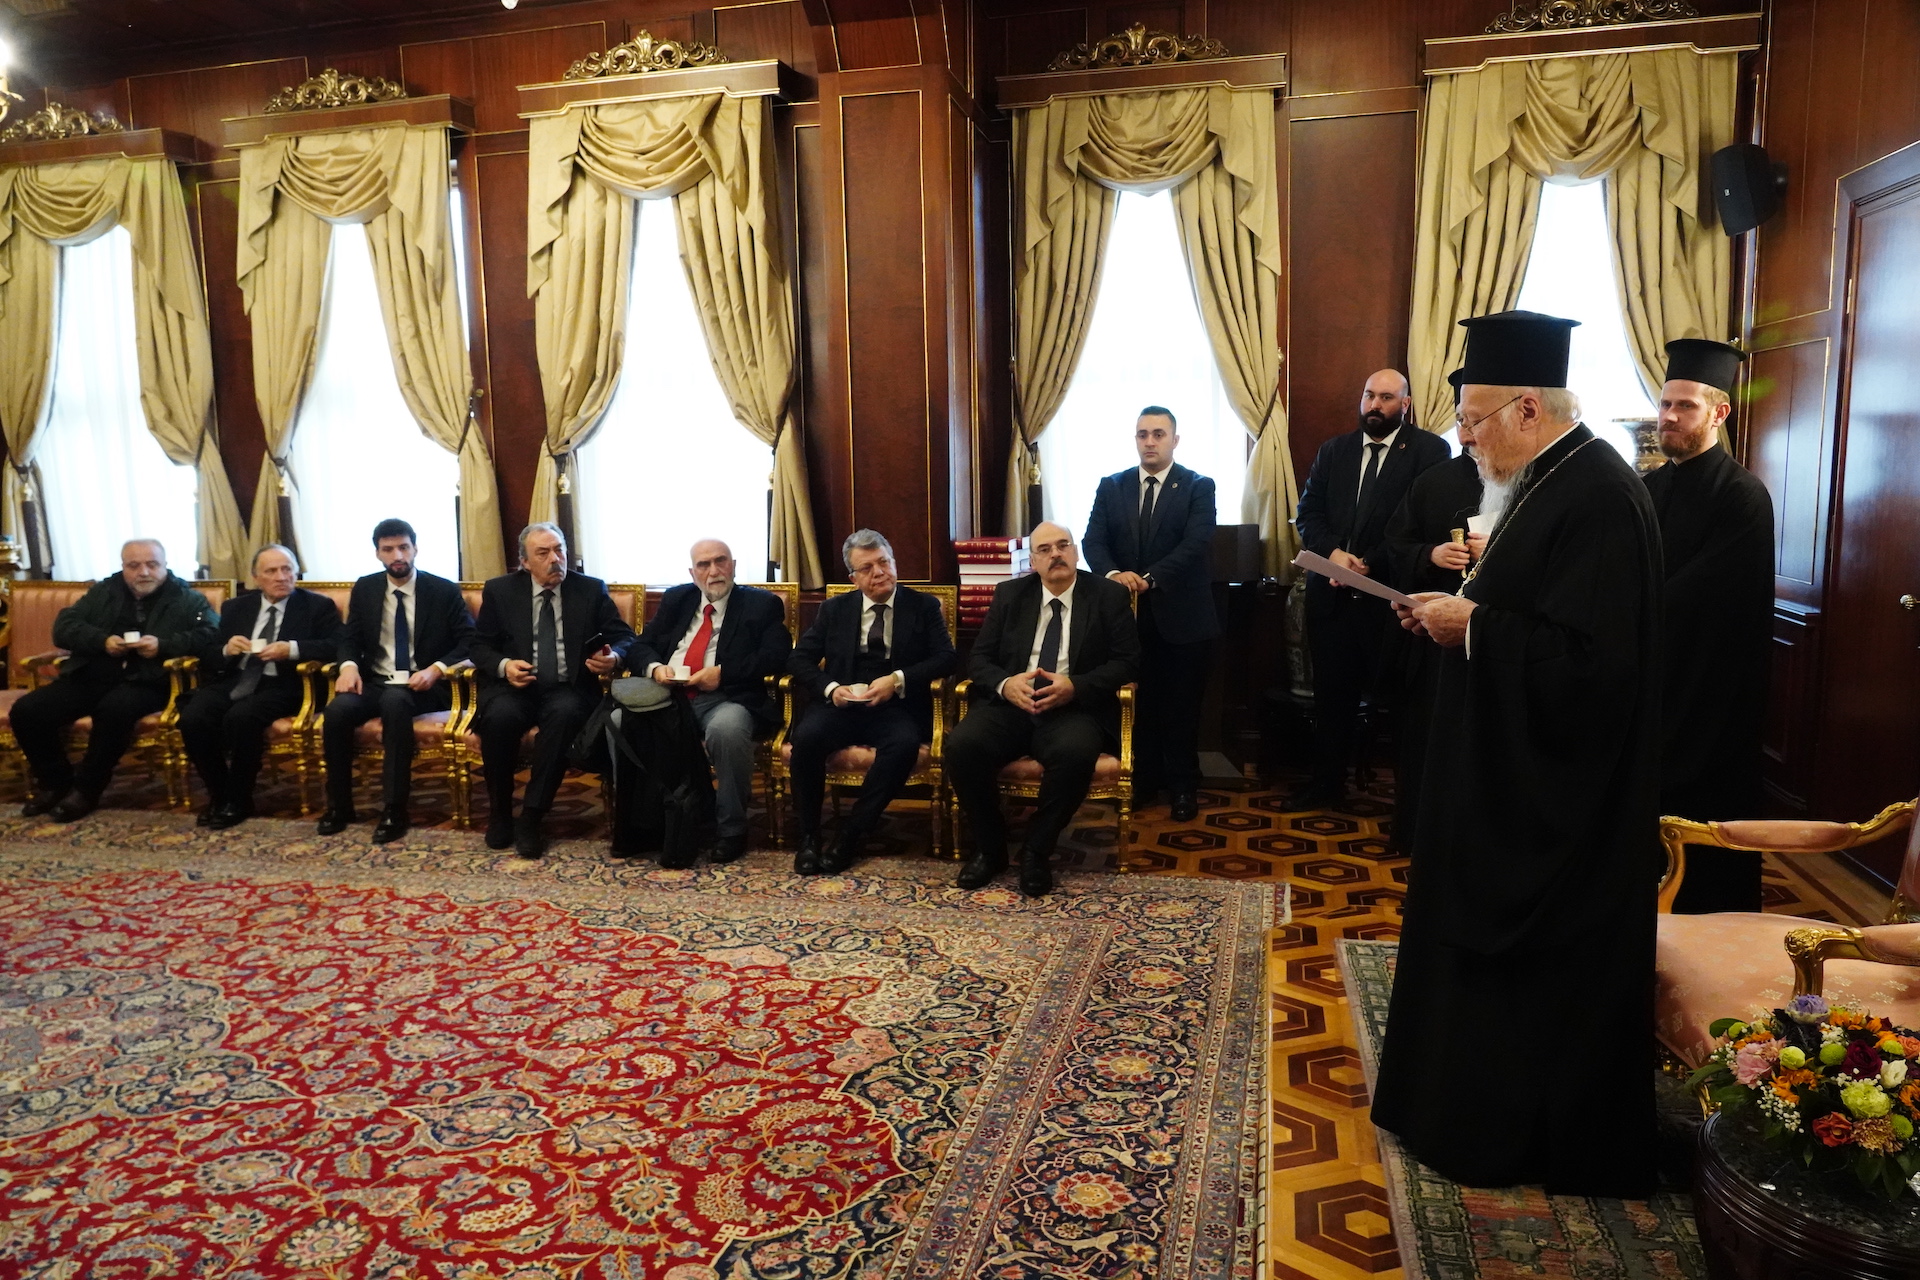 Ecumenical Patriarch Bartholomew: “We persist in the struggle, and we do not lower the flag”